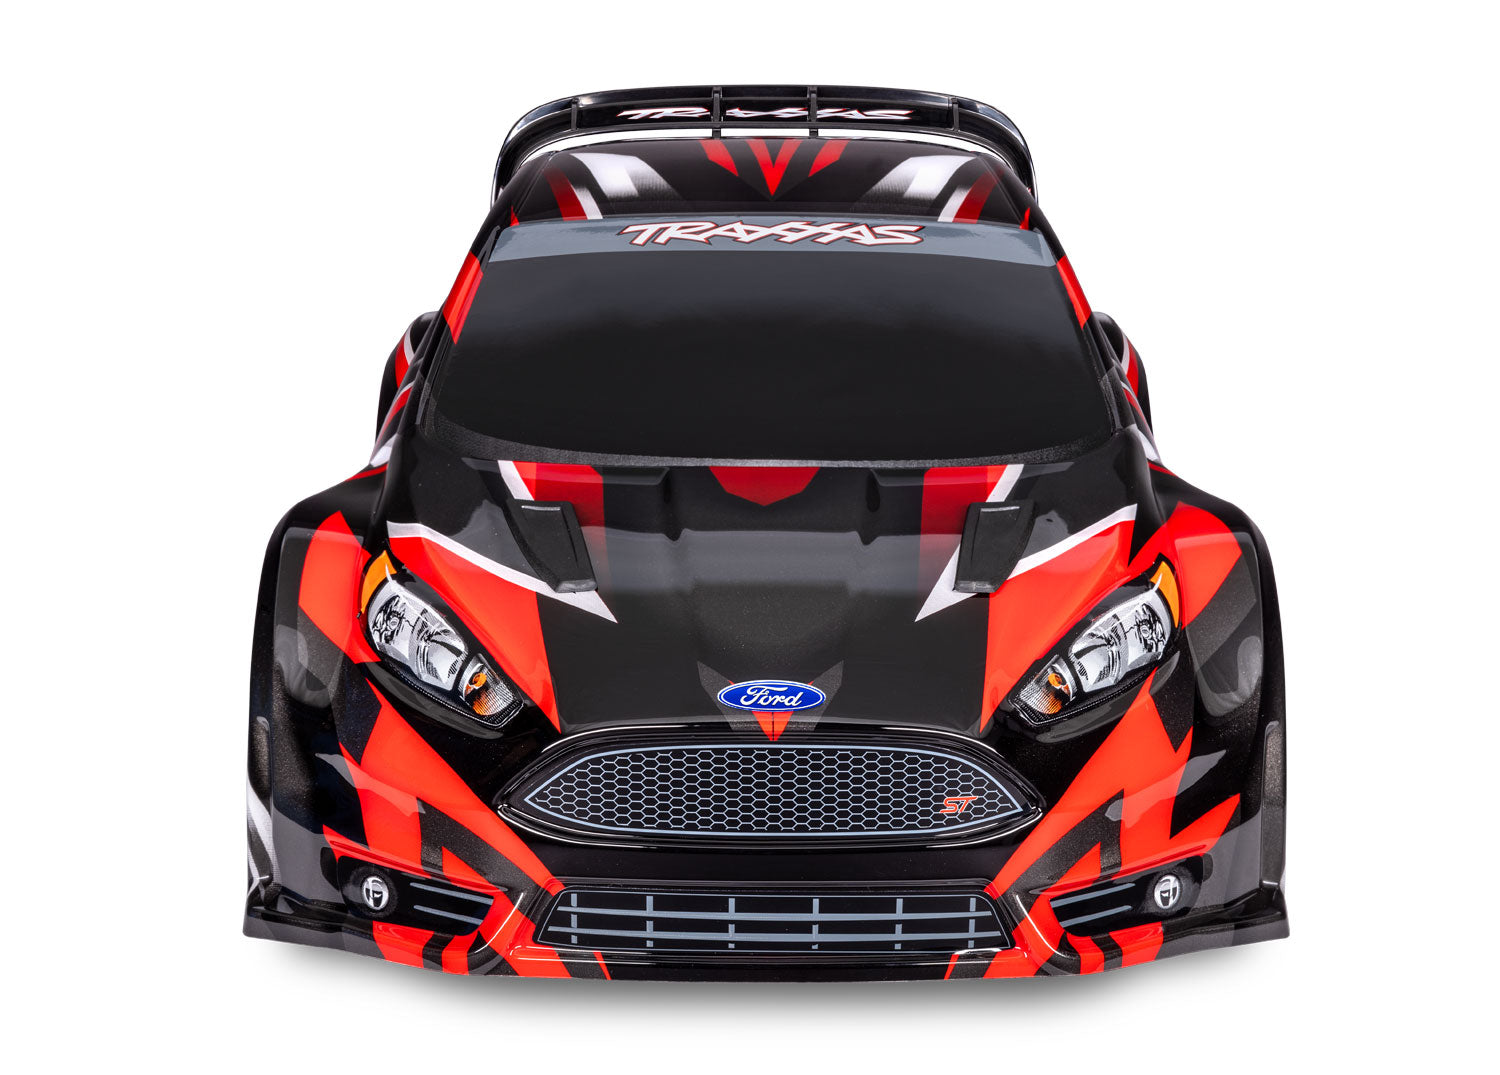 Red Ford® Fiesta® ST Rally Brushless: 1/10 Scale Electric Rally Racer with TQ™ 2.4GHz Radio System